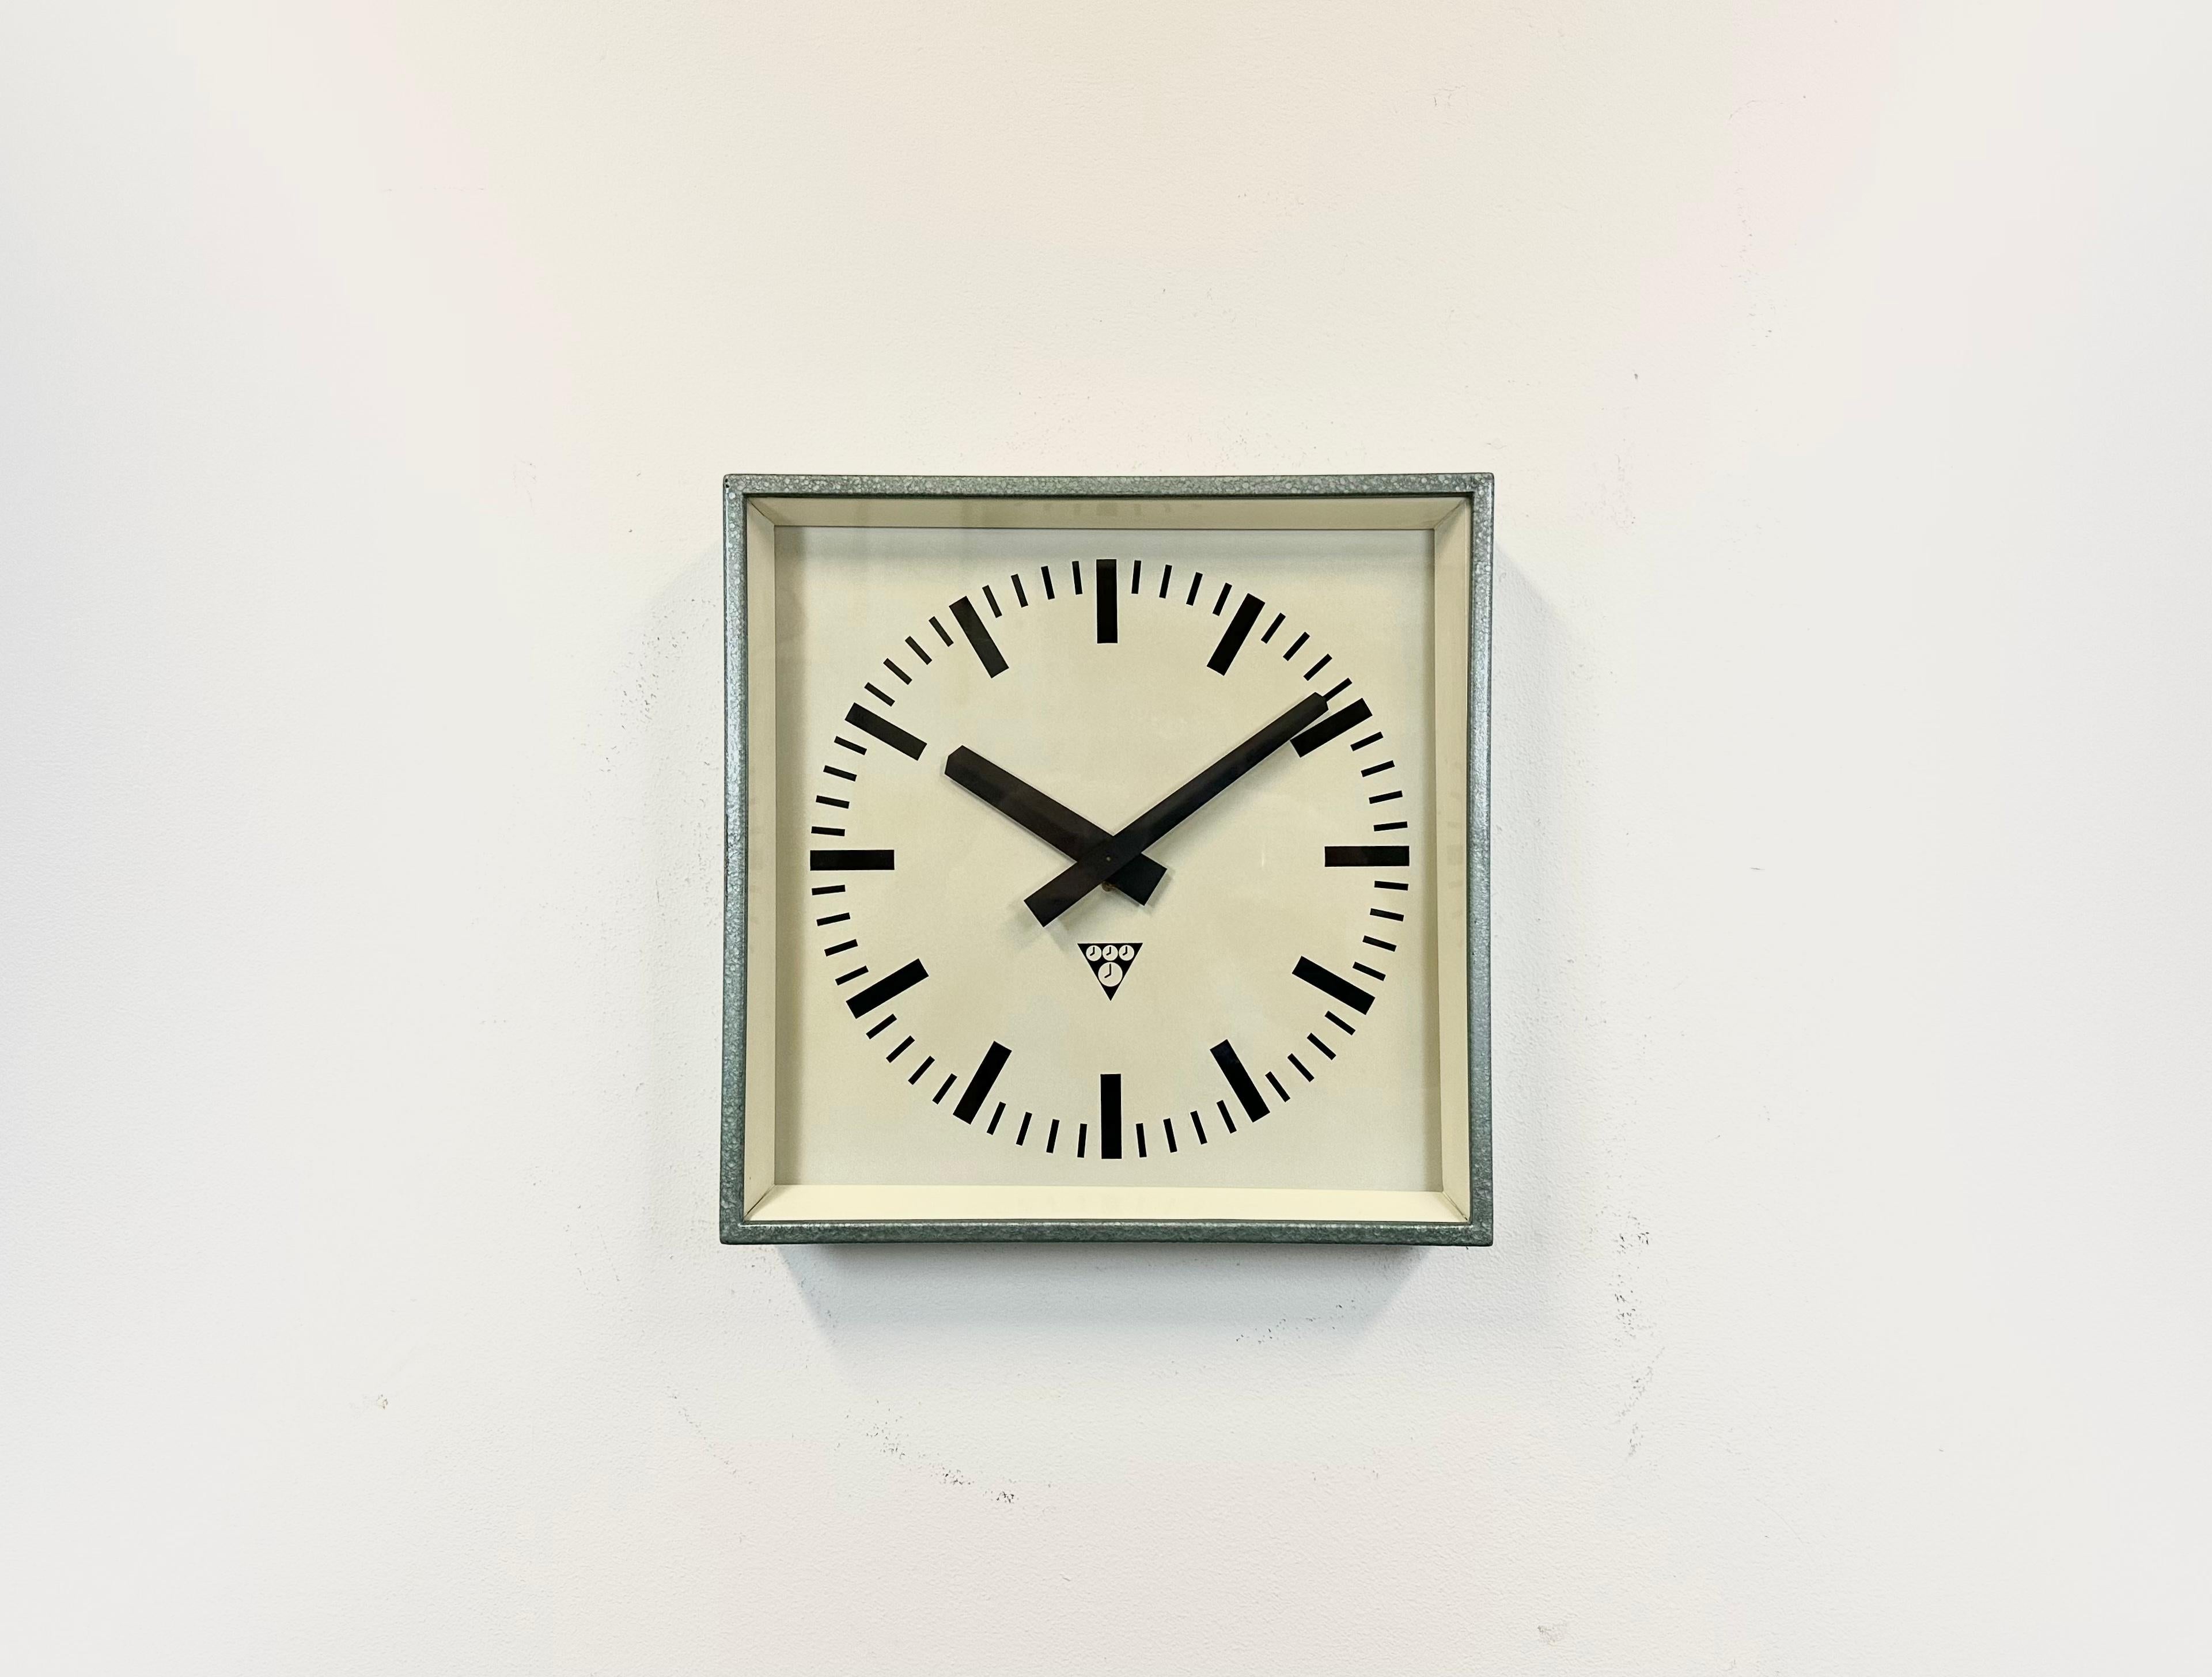 - Clock made by Pragotron in former Czechoslovakia during the 1970s 
- Was used in factories, schools and railway stations 
- Green hammerpaint metal body 
- Aluminium dial and hands 
- Clear glass cover 
- Former slave clock has been converted